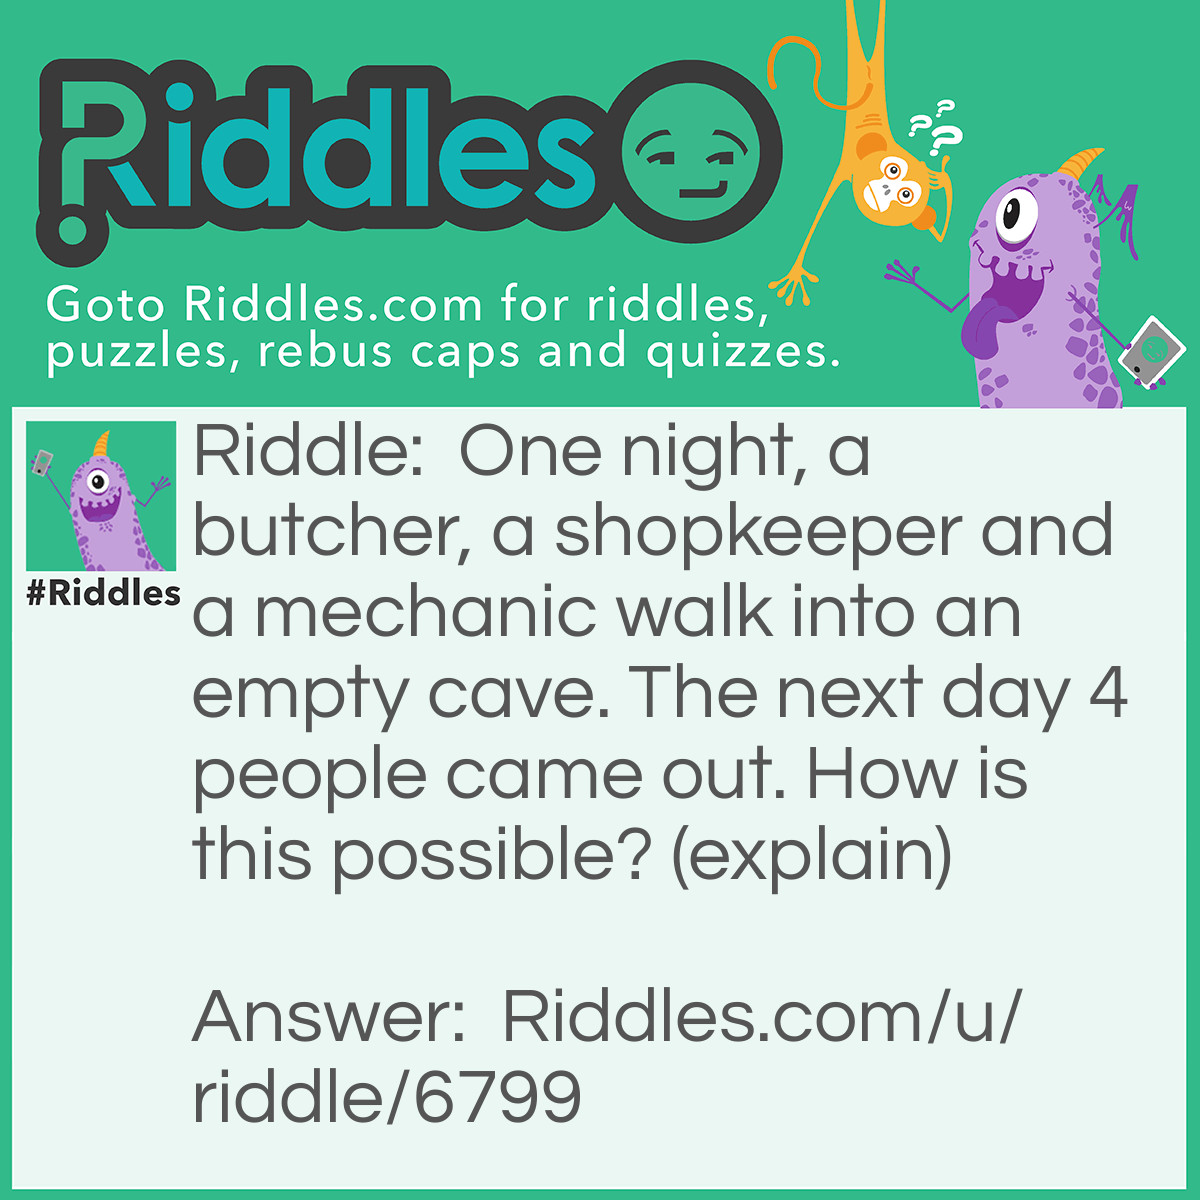 Riddle: One night, a butcher, a shopkeeper and a mechanic walk into an empty cave. The next day 4 people came out. How is this possible? (explain) Answer: 'One night' means 'one KNIGHT' therefore four people walked into the cave in the first place.